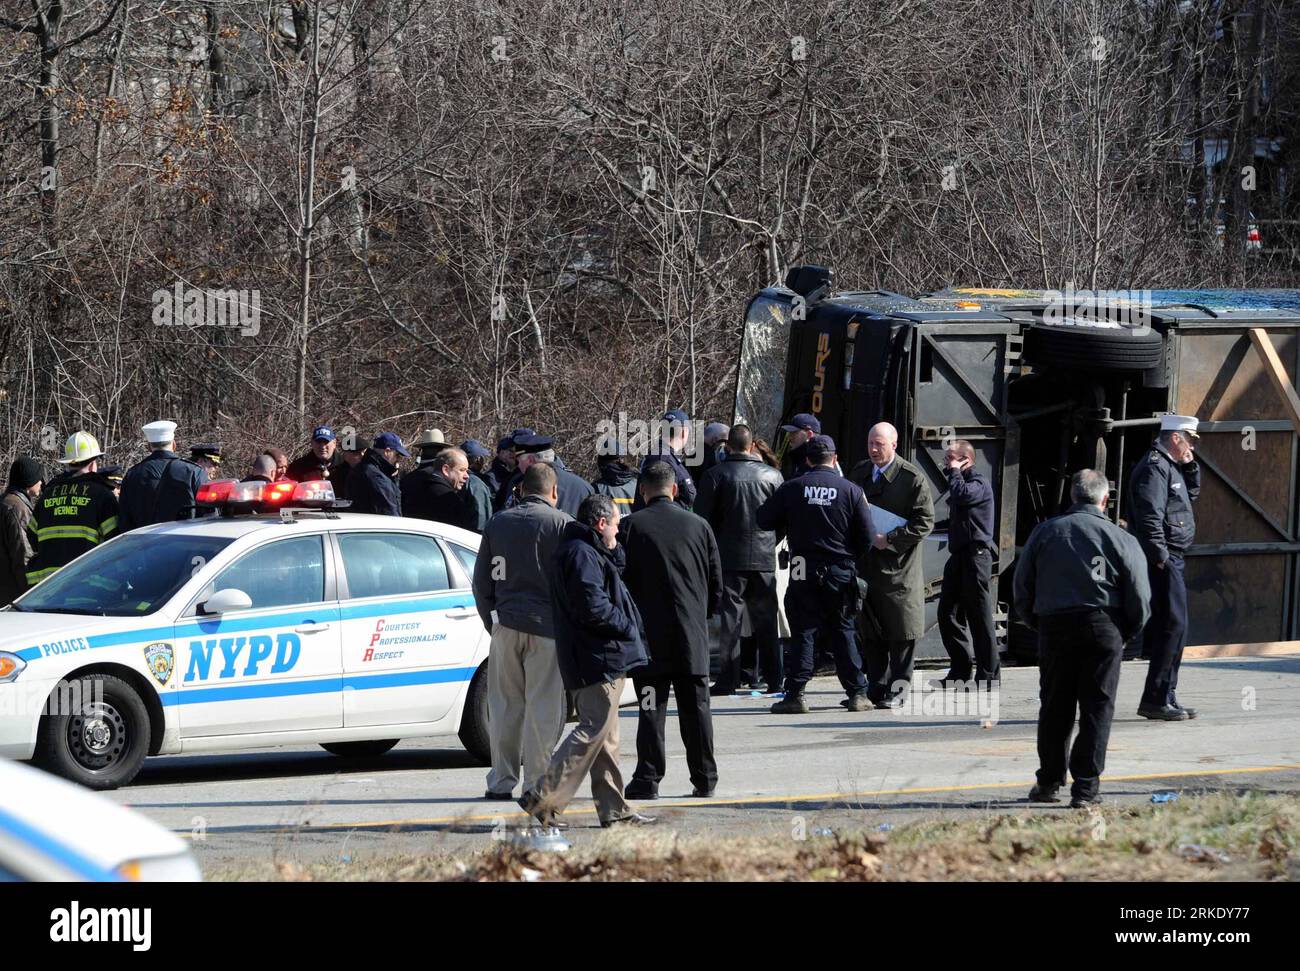 Bildnummer: 55016887  Datum: 12.03.2011  Copyright: imago/Xinhua (110312) -- NEW YORK, March 12, 2011 (Xinhua) -- gather at the site where a tour bus overturned on the New England Thruway in the Bronx near the Westchester County line, the United States, on March 12, 2011. Thirteen were killed and six others seriously injured when a tour bus overturned on a highway in the U.S. state of New York on Saturday. (Xinhua/Shen Hong) (lr) U.S.-NEW YORK-BUS ACCIDENT PUBLICATIONxNOTxINxCHN Gesellschaft Busunglück Busunfall Verkehrsunfall kbdig xsp 2011 quer  o0 Bus, Unfall, Unglück, Totale    Bildnummer Stock Photo